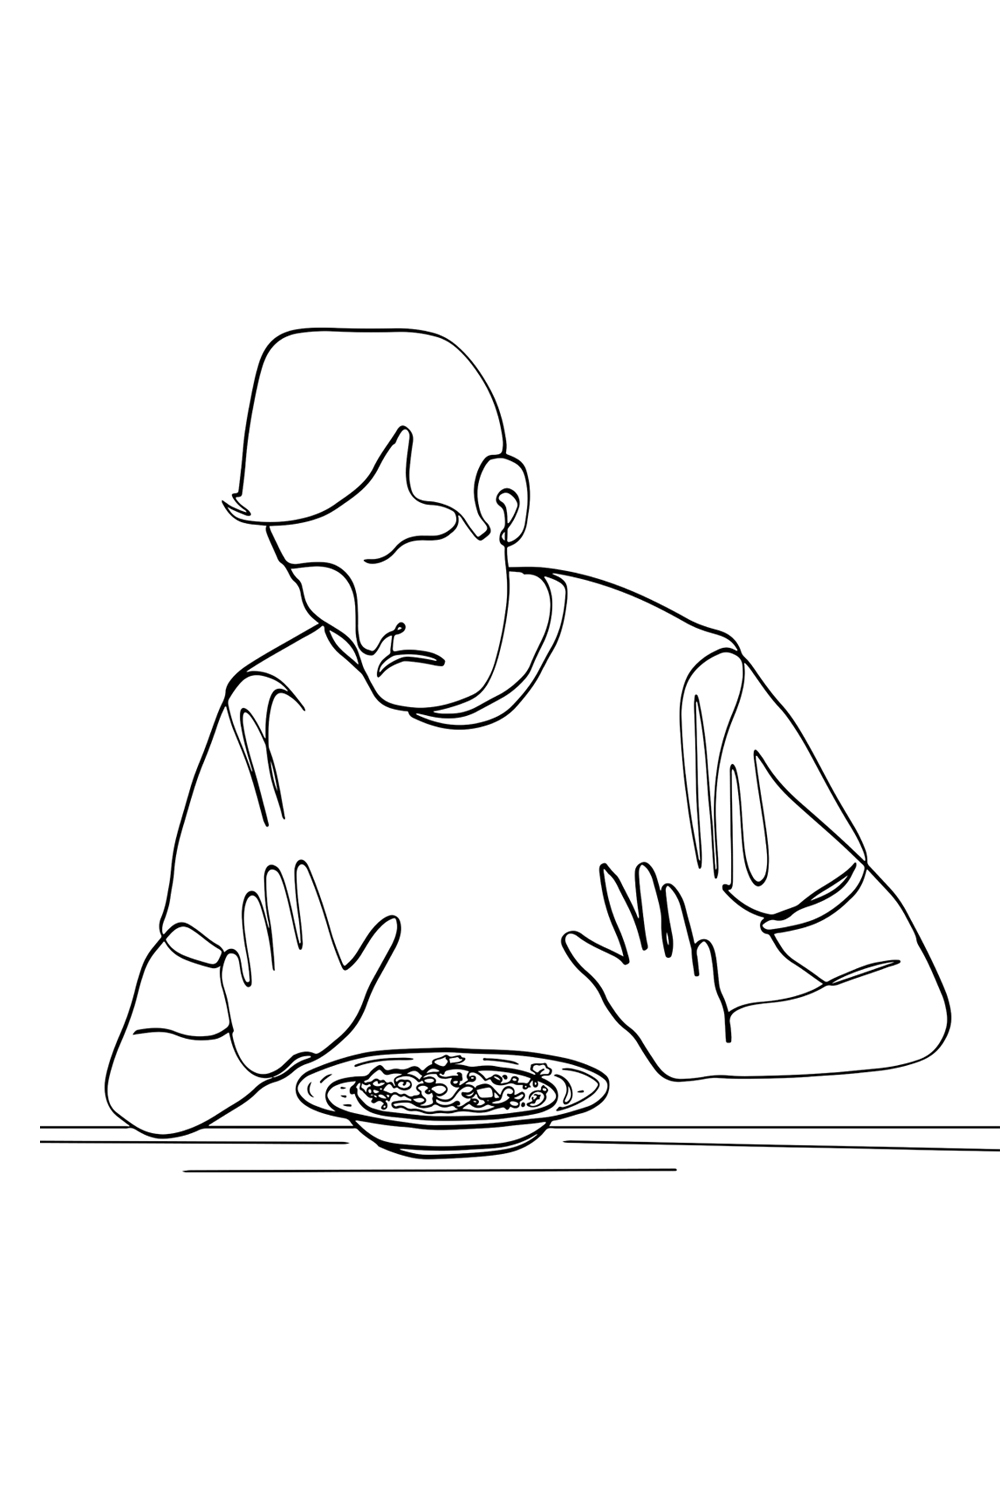 Food Rejection Saga: Vector Image of Coping with Illness and No Appetite, Battling Hunger Amidst Illness: Hand-Drawn Cartoon Illustration, Dealing with No Appetite pinterest preview image.